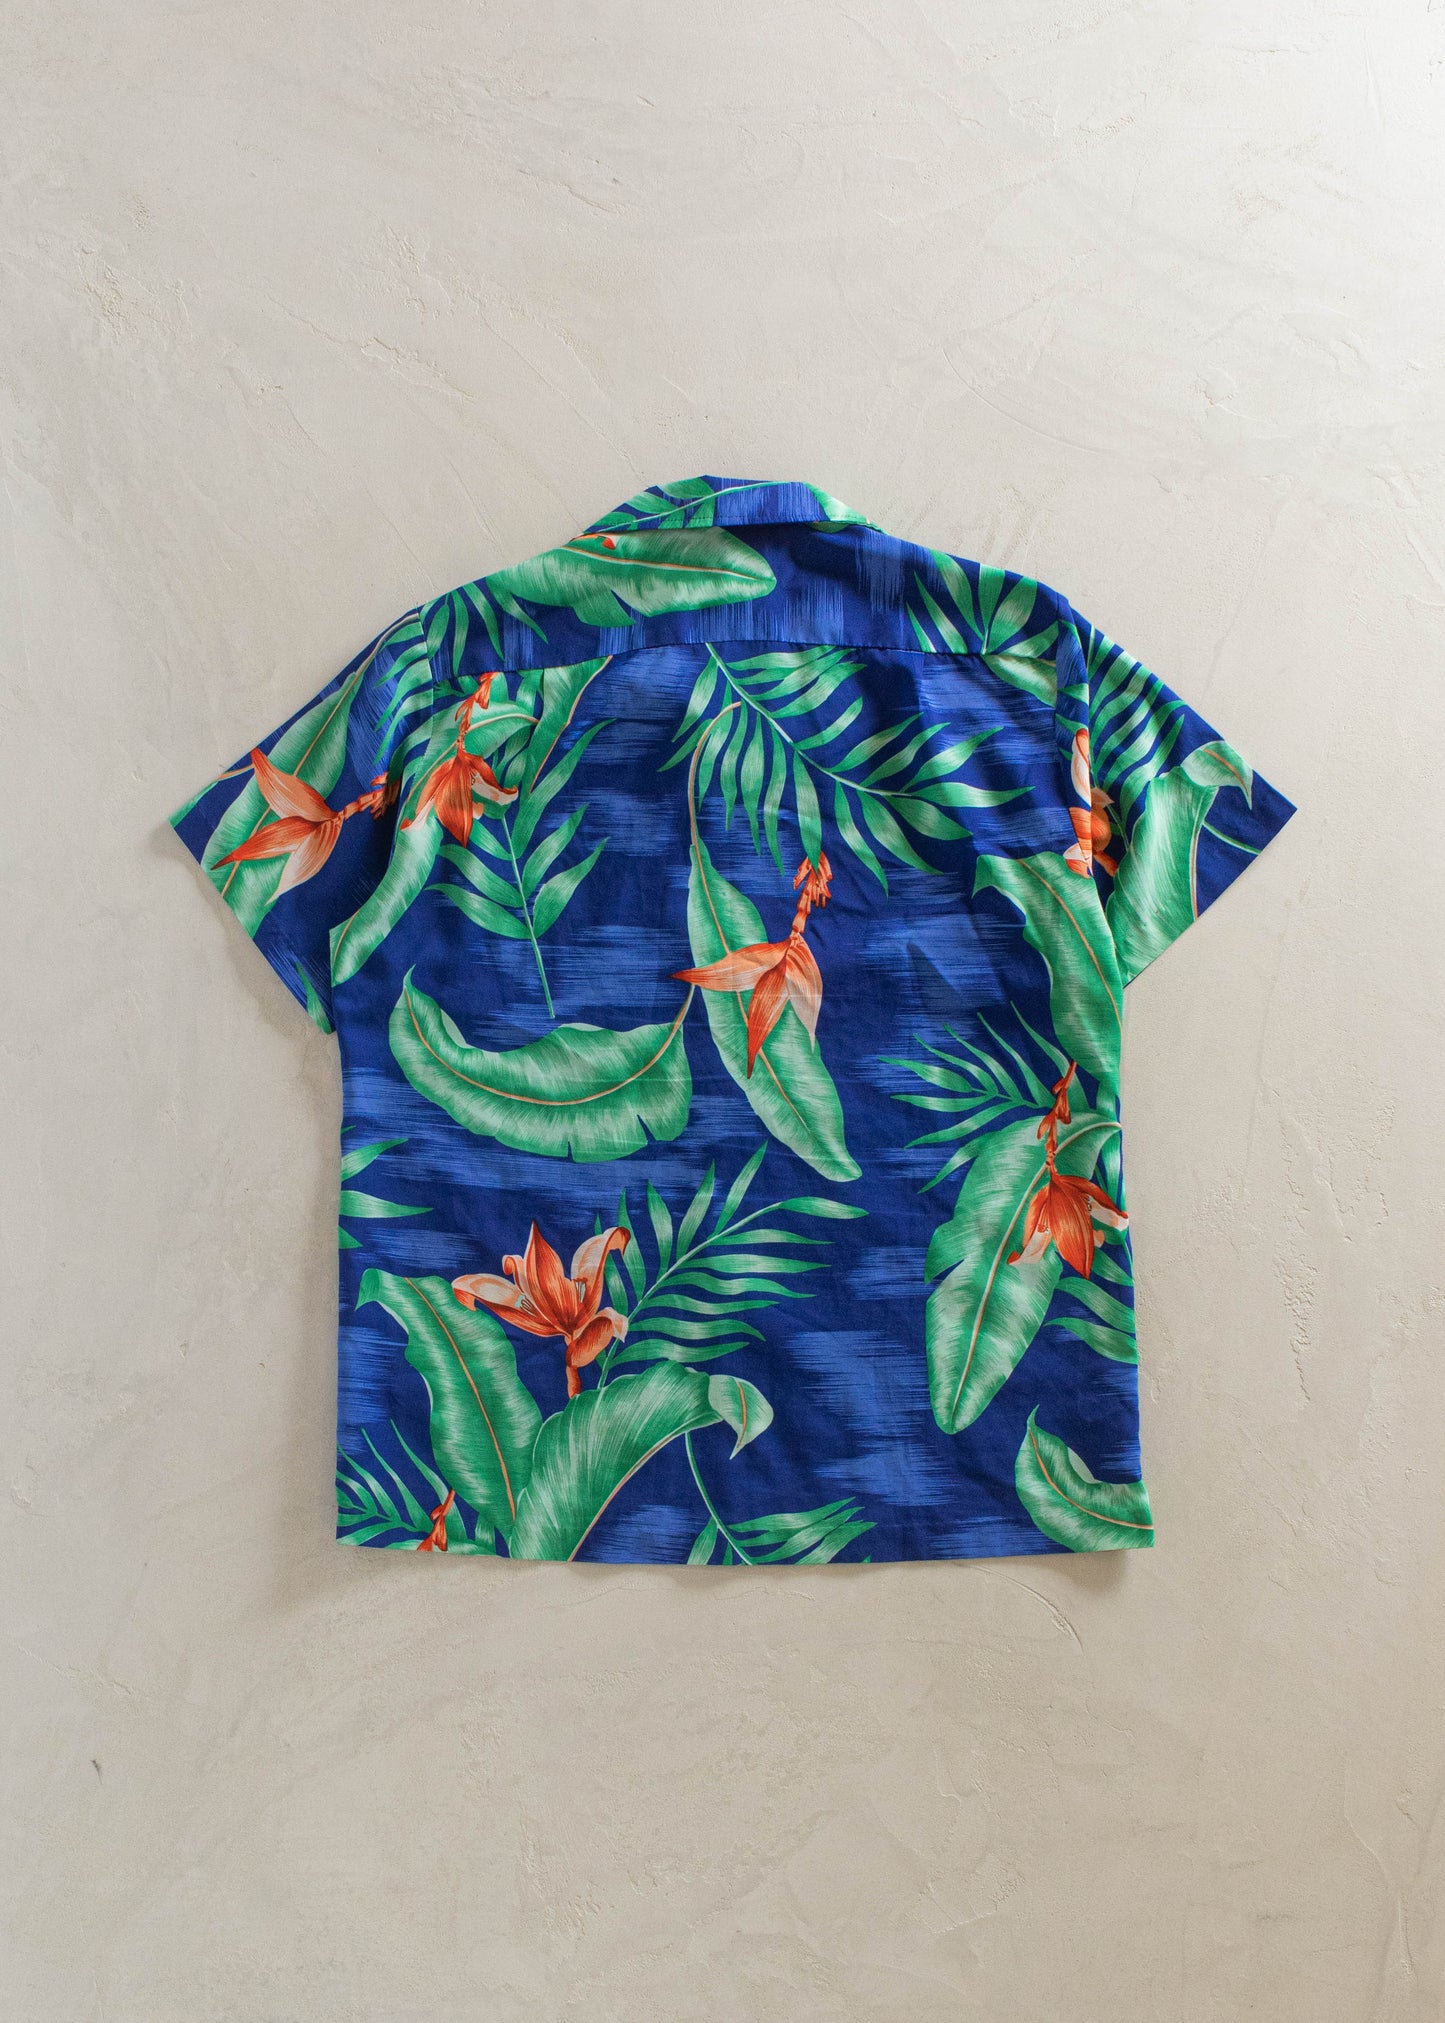 1980s Tropical Pattern Short Sleeve Button Up Shirt Size S/M